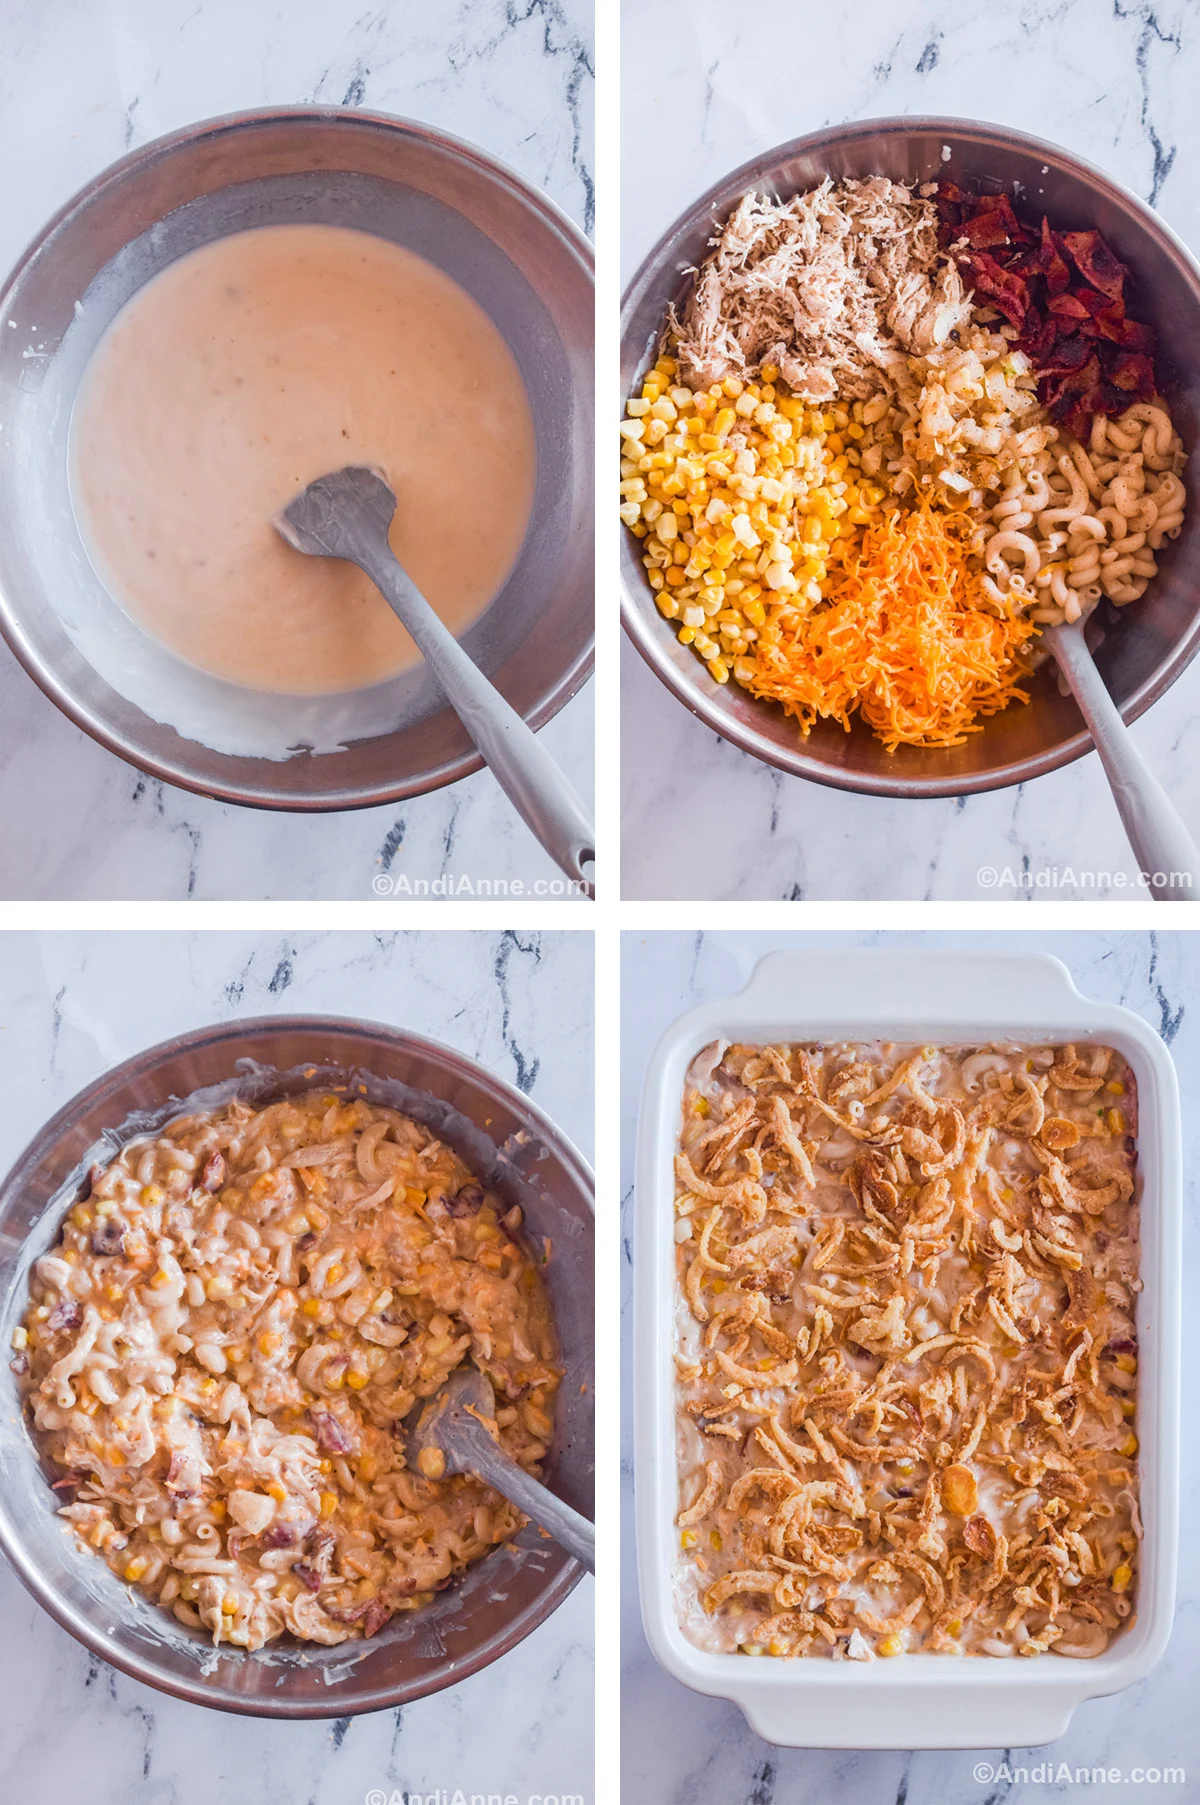 Four images of steps to make recipe. First is creamy of mushroom soup in a steel bowl with a spatula. Second is corn, shredded cheese, shredded chicken, bacon and pasta in the steel bowl with a spatula. Third is all ingredients stirred together to create a creamy mixture. Fourth is chicken casserole poured into white dish with french onions on top.